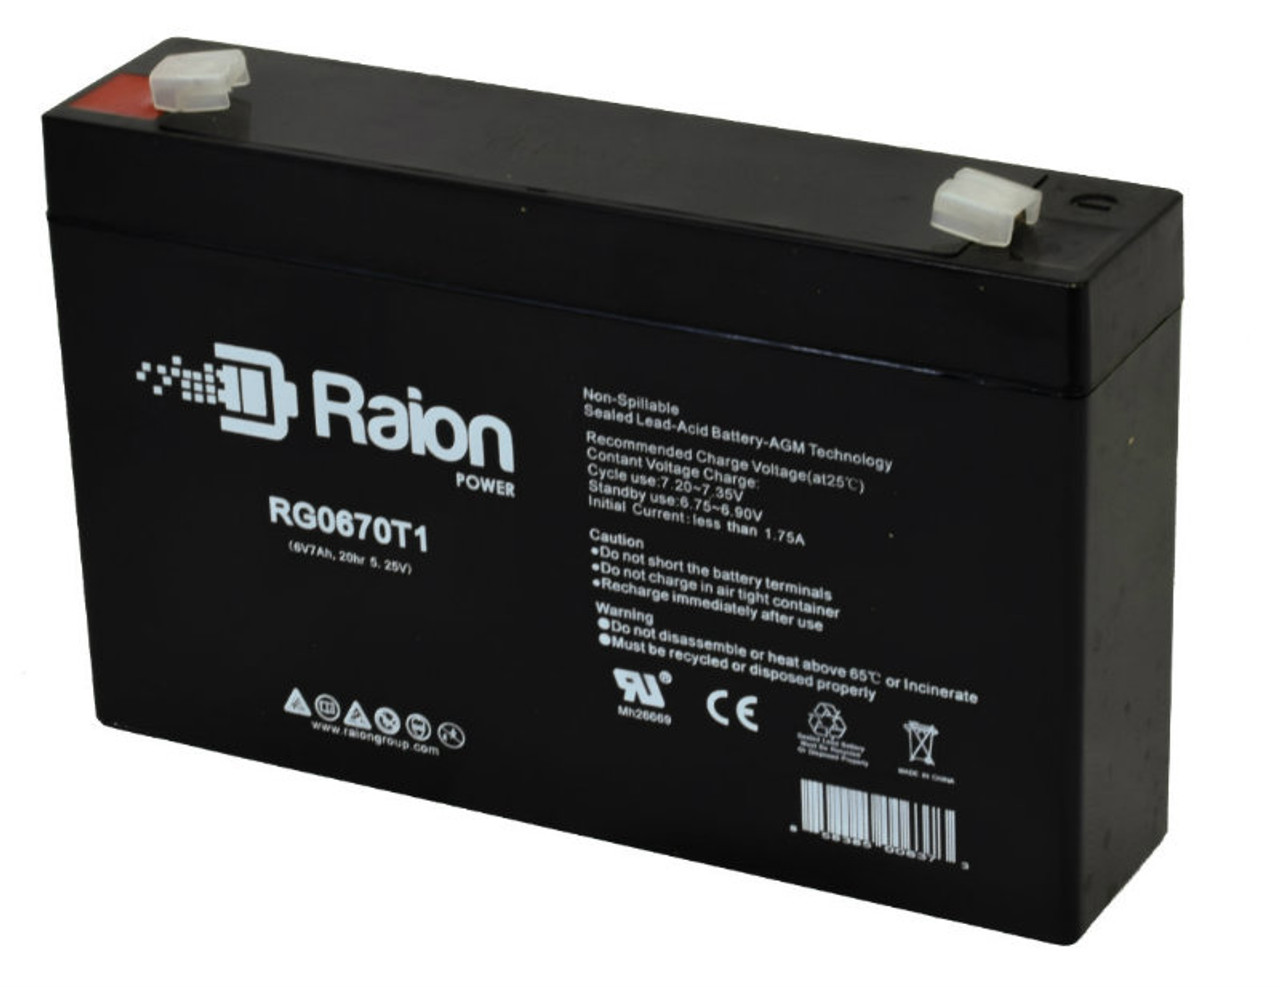 Raion Power 6V 7Ah Replacement Ride-On Toy Battery Cartridge for Kalee KL40007BF Bigfoot Monster Jeep